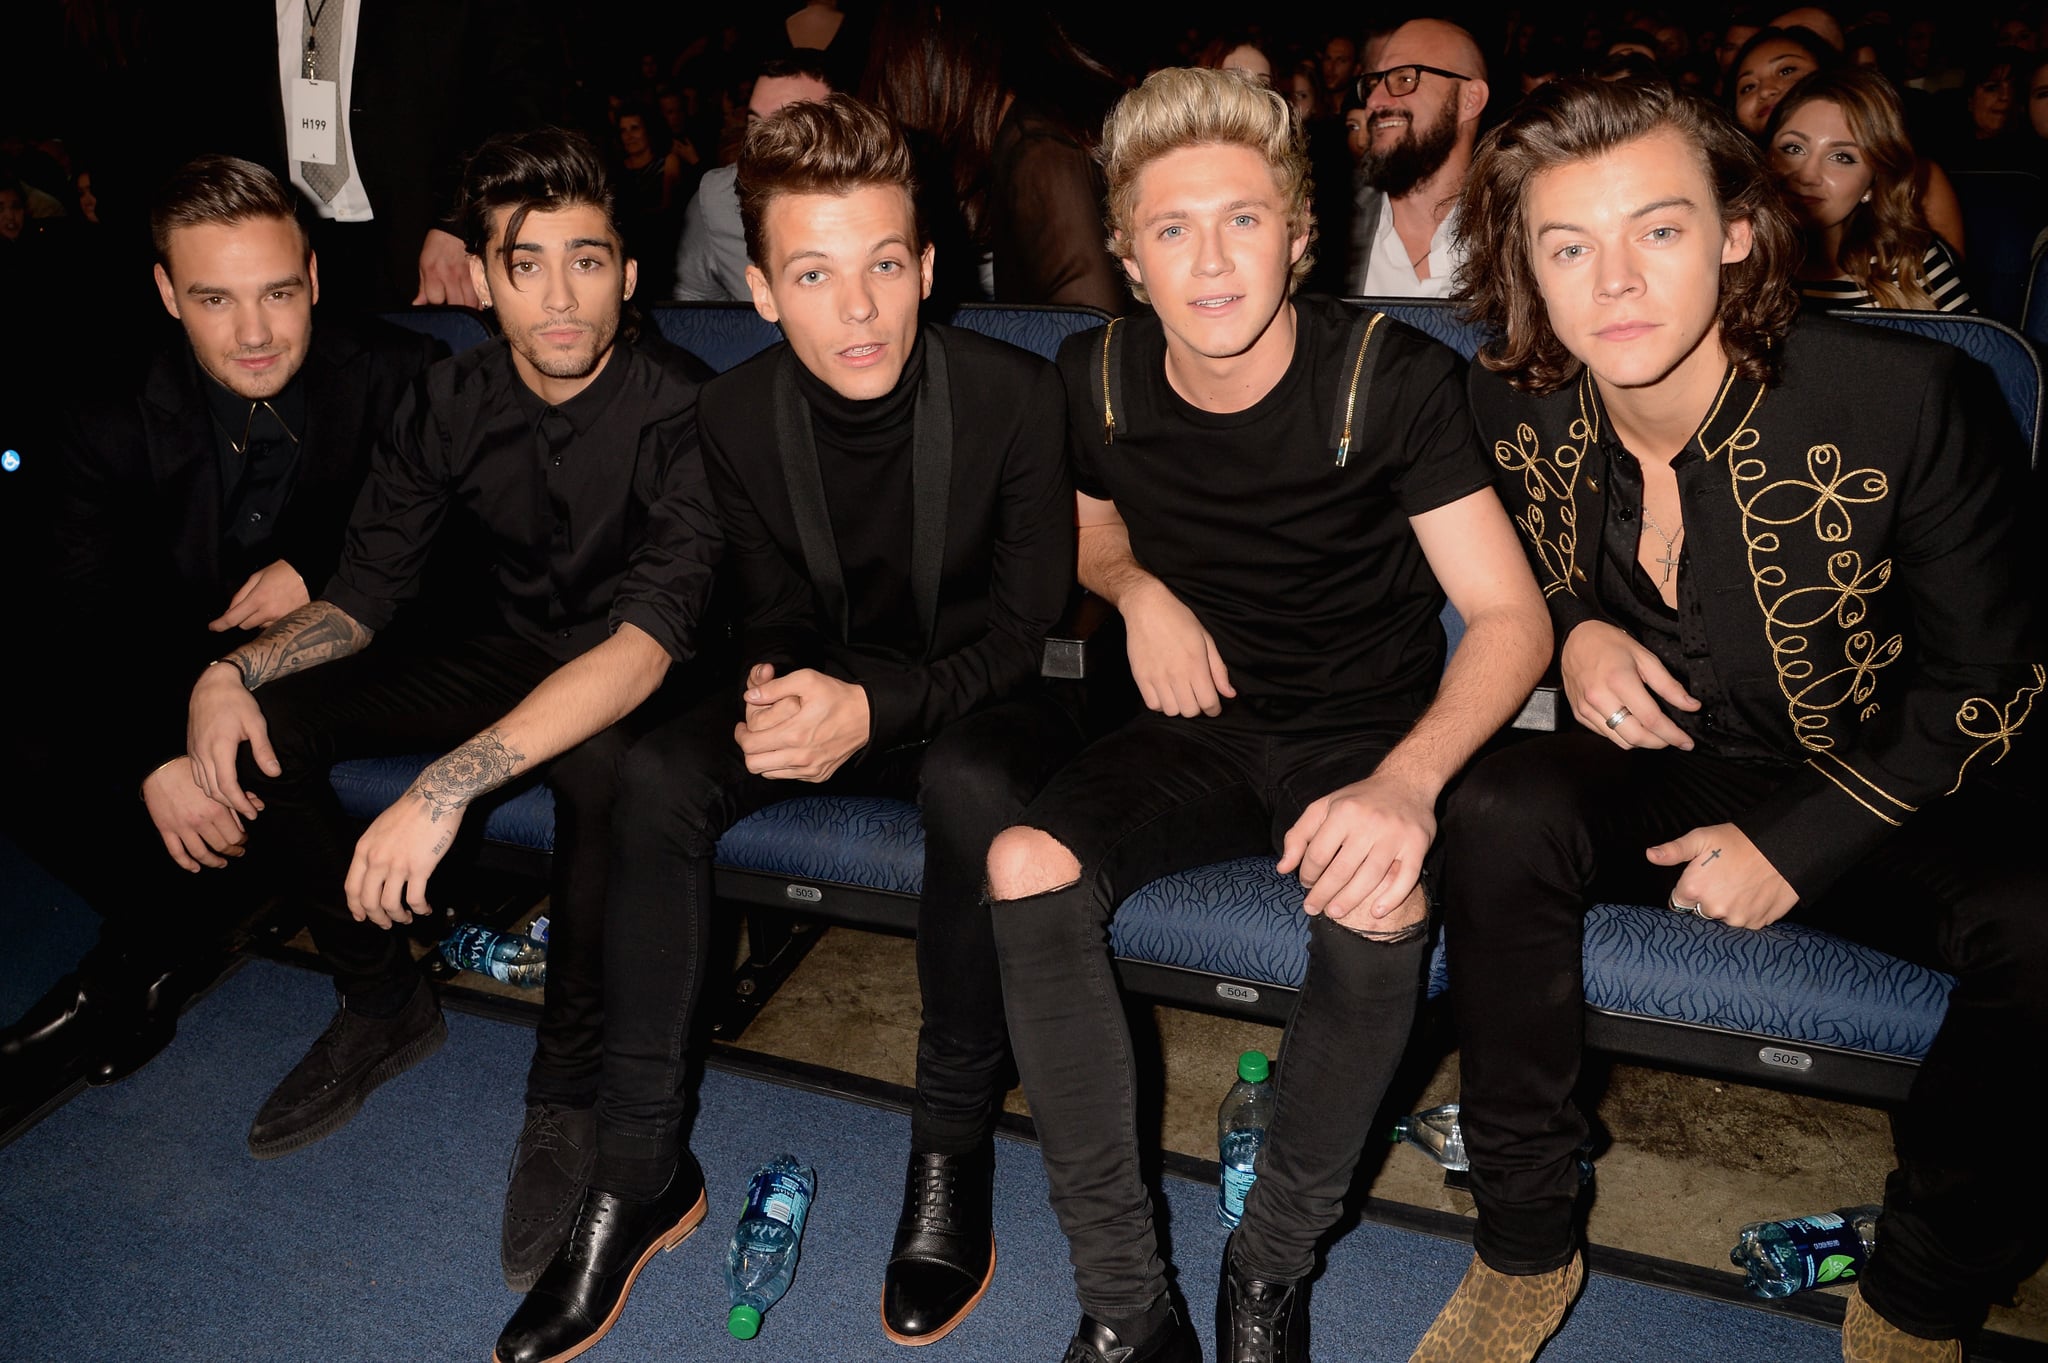   (L-R) Singers Liam Payne, Zayn Malik, Louis Tomlinson, Niall Horan and Harry Styles of One Direction attend the 2014 American Music Awards at Nokia Theatre L.A. Live on November 23, 2014 in Los Angeles, California.  (Photo by Jeff Kravitz/AMA2014/FilmMagic)